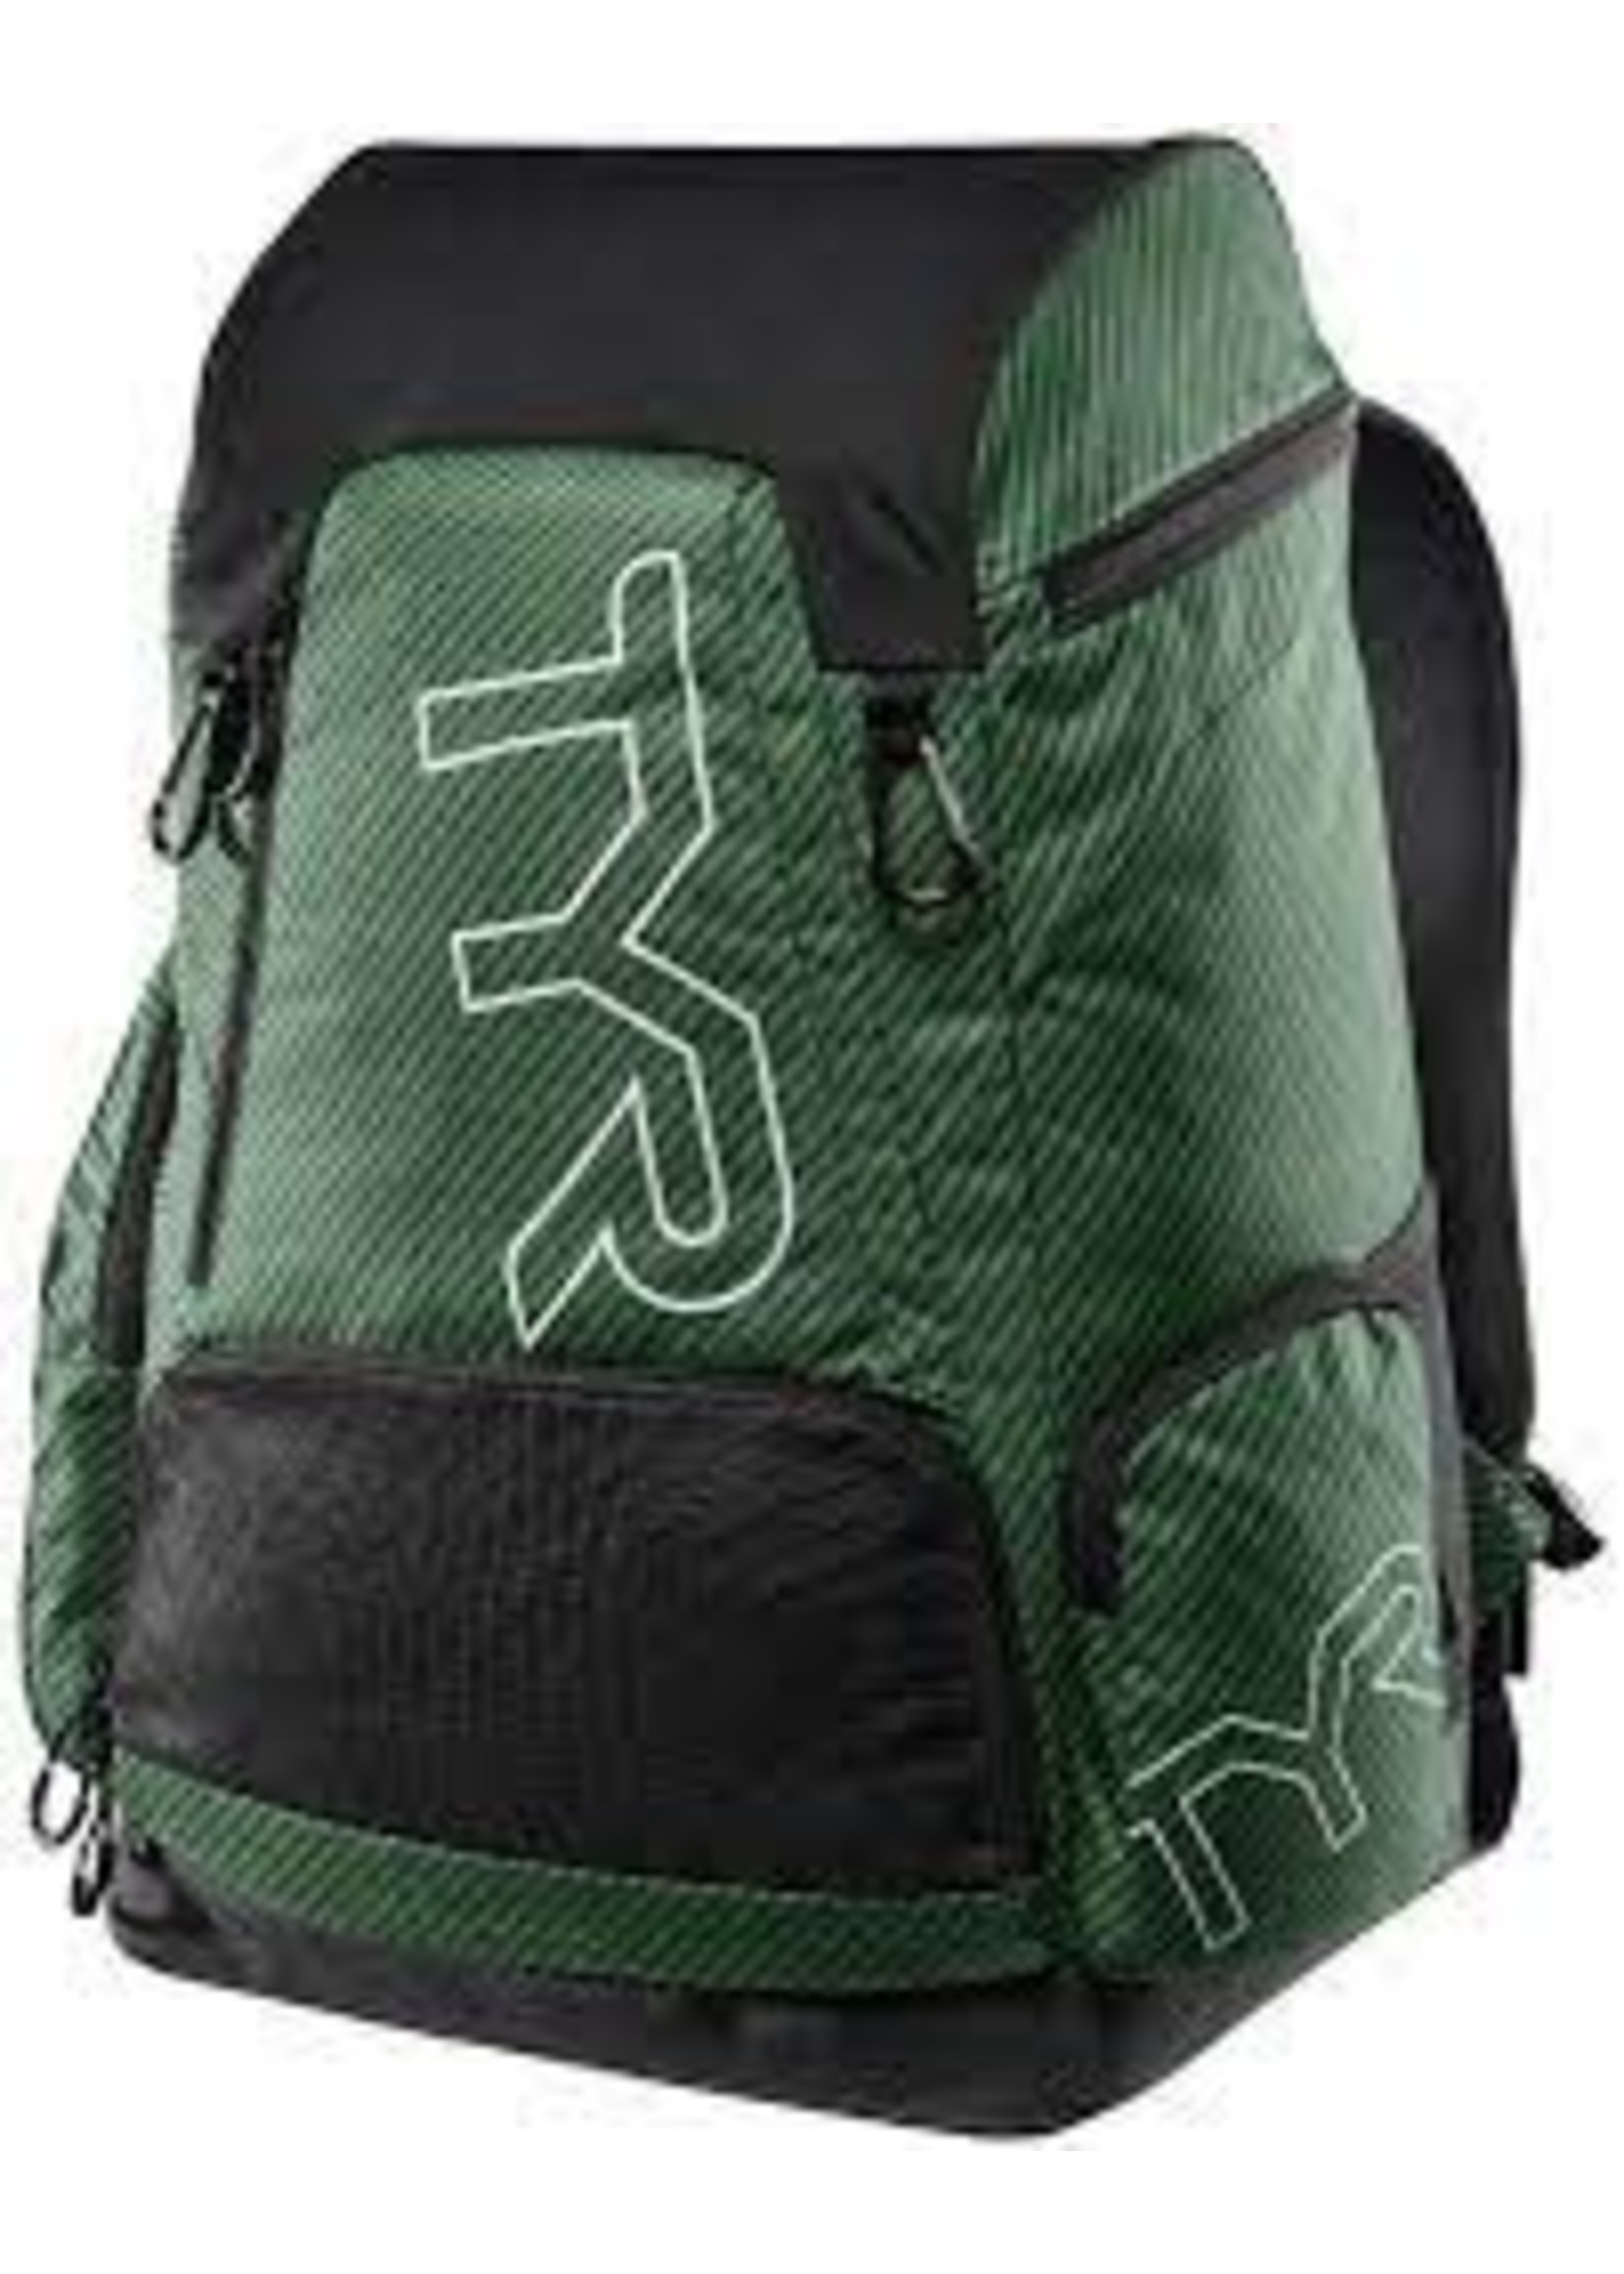 TYR ALLIANCE 45L BACKPACK